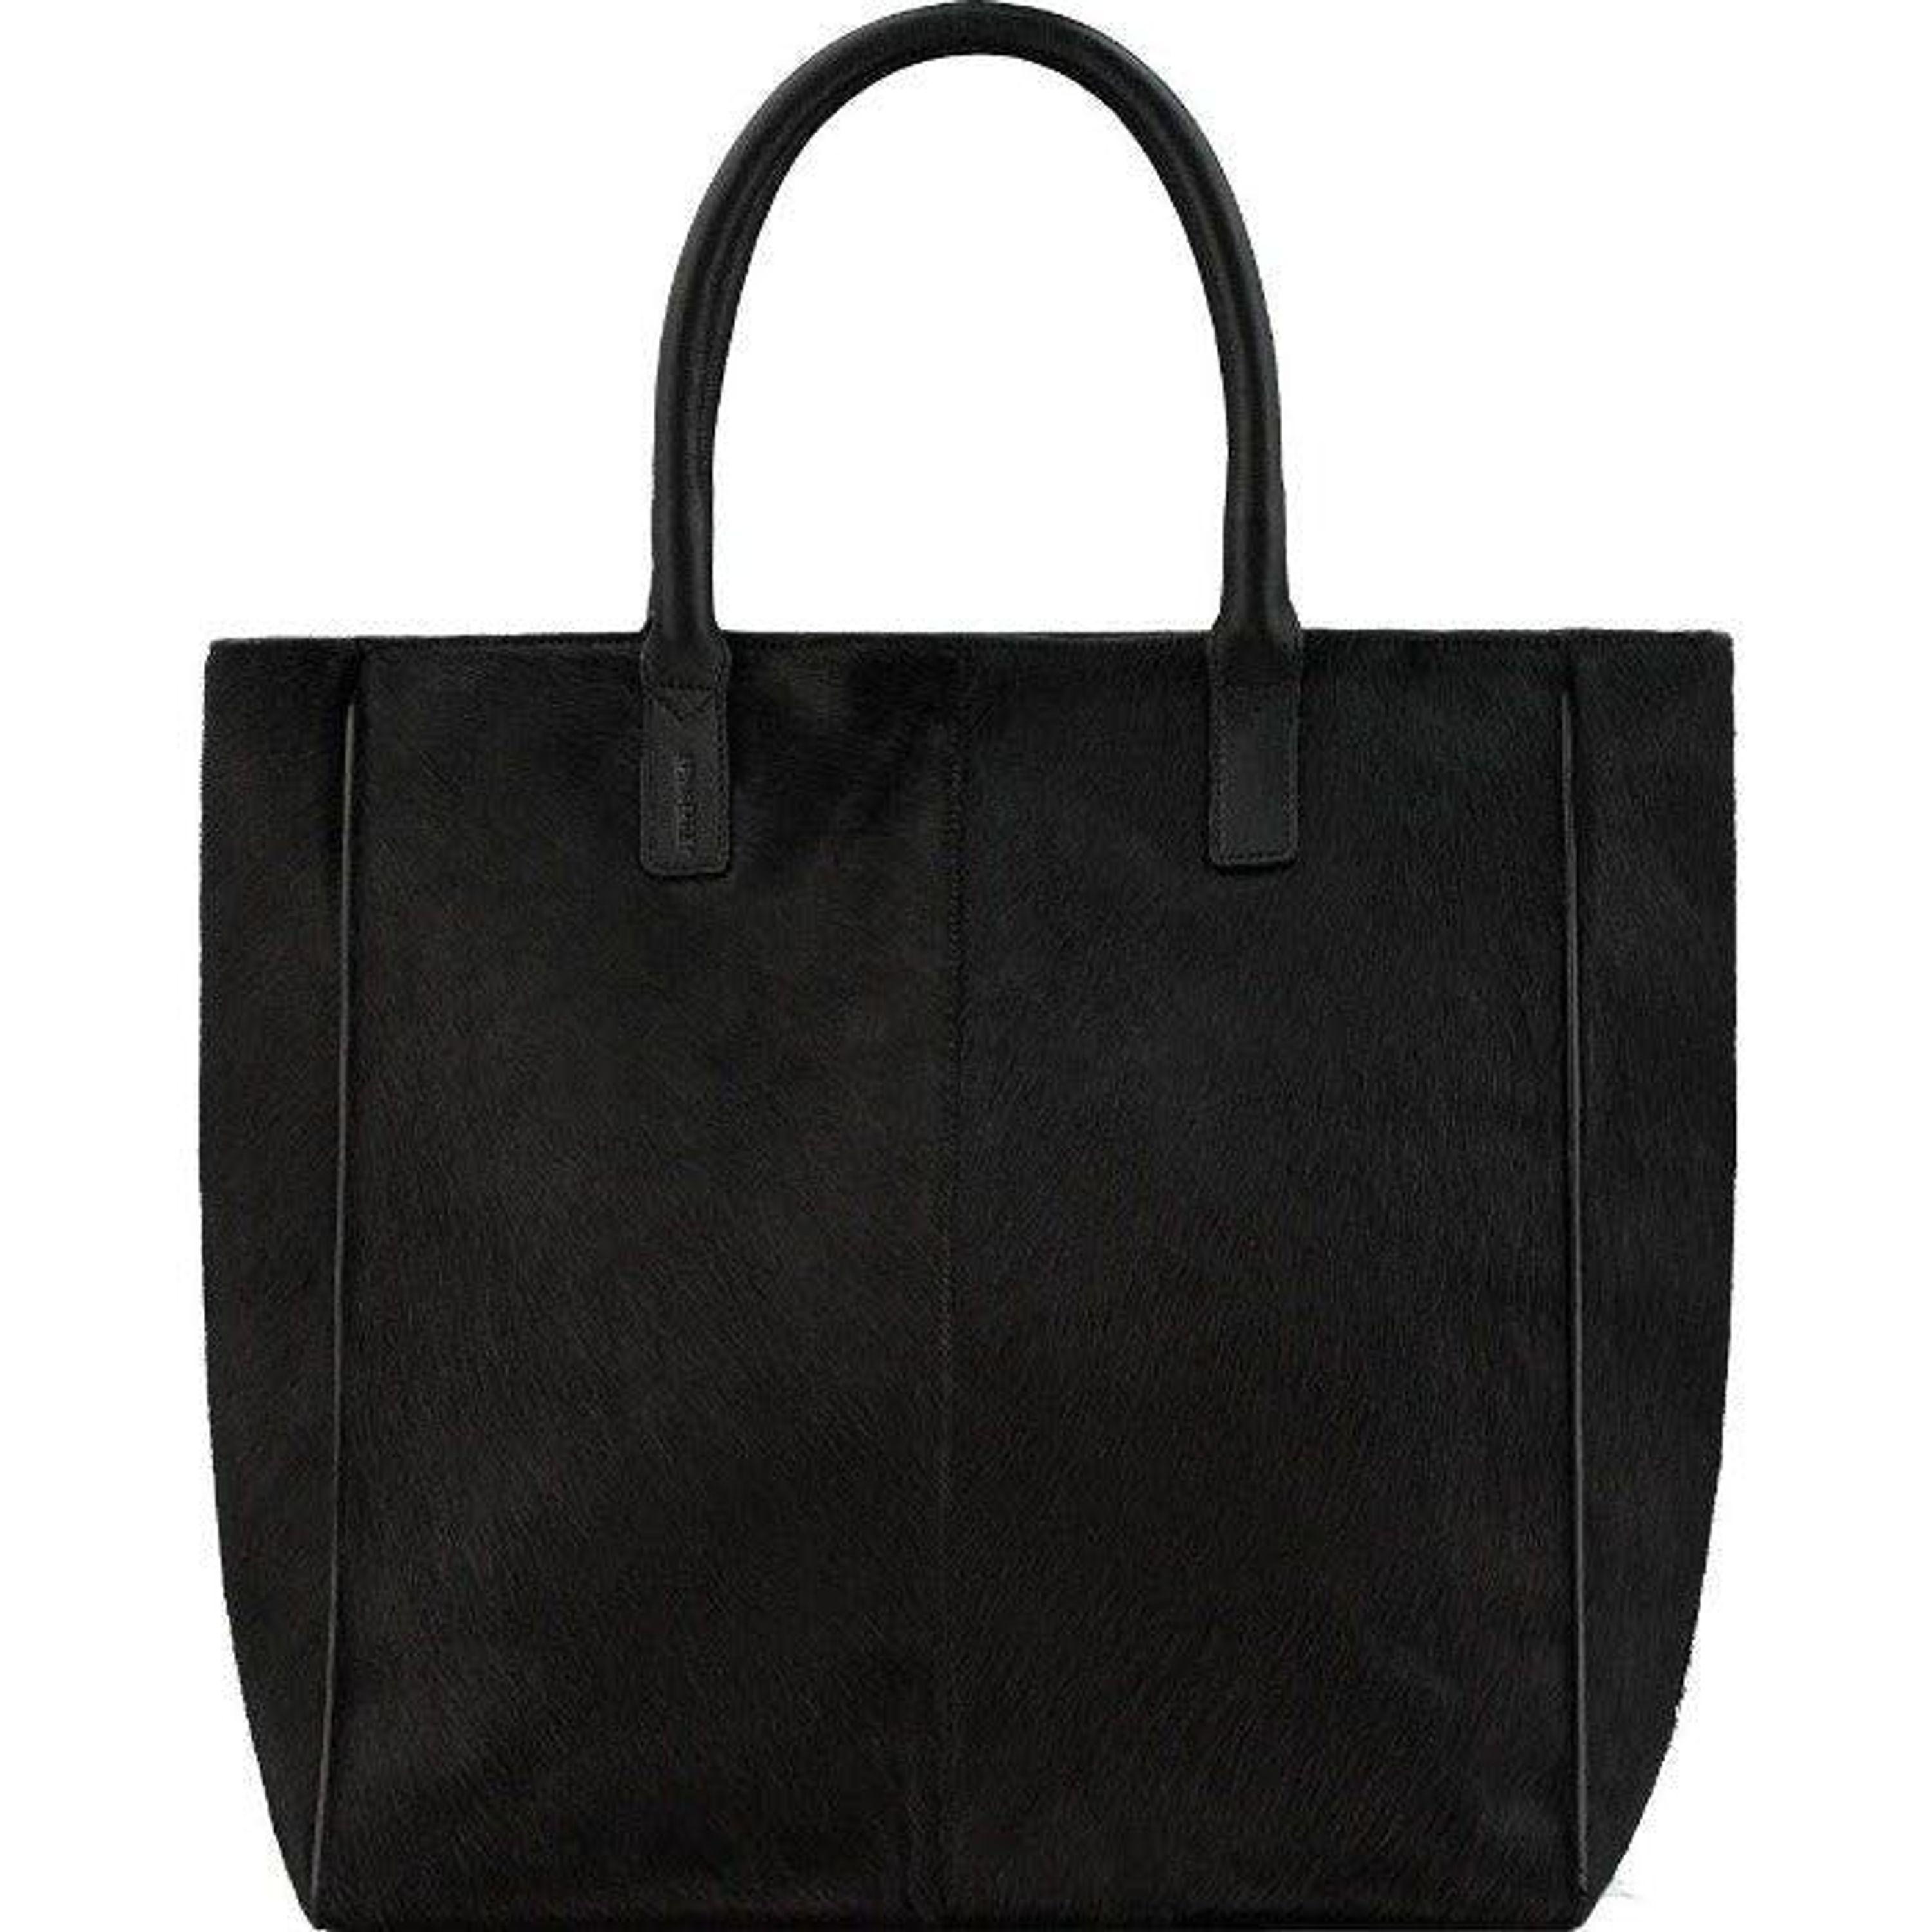 Brix + Bailey Brix + Bailey Black Calf Hair Large Leather Tote | Lyst